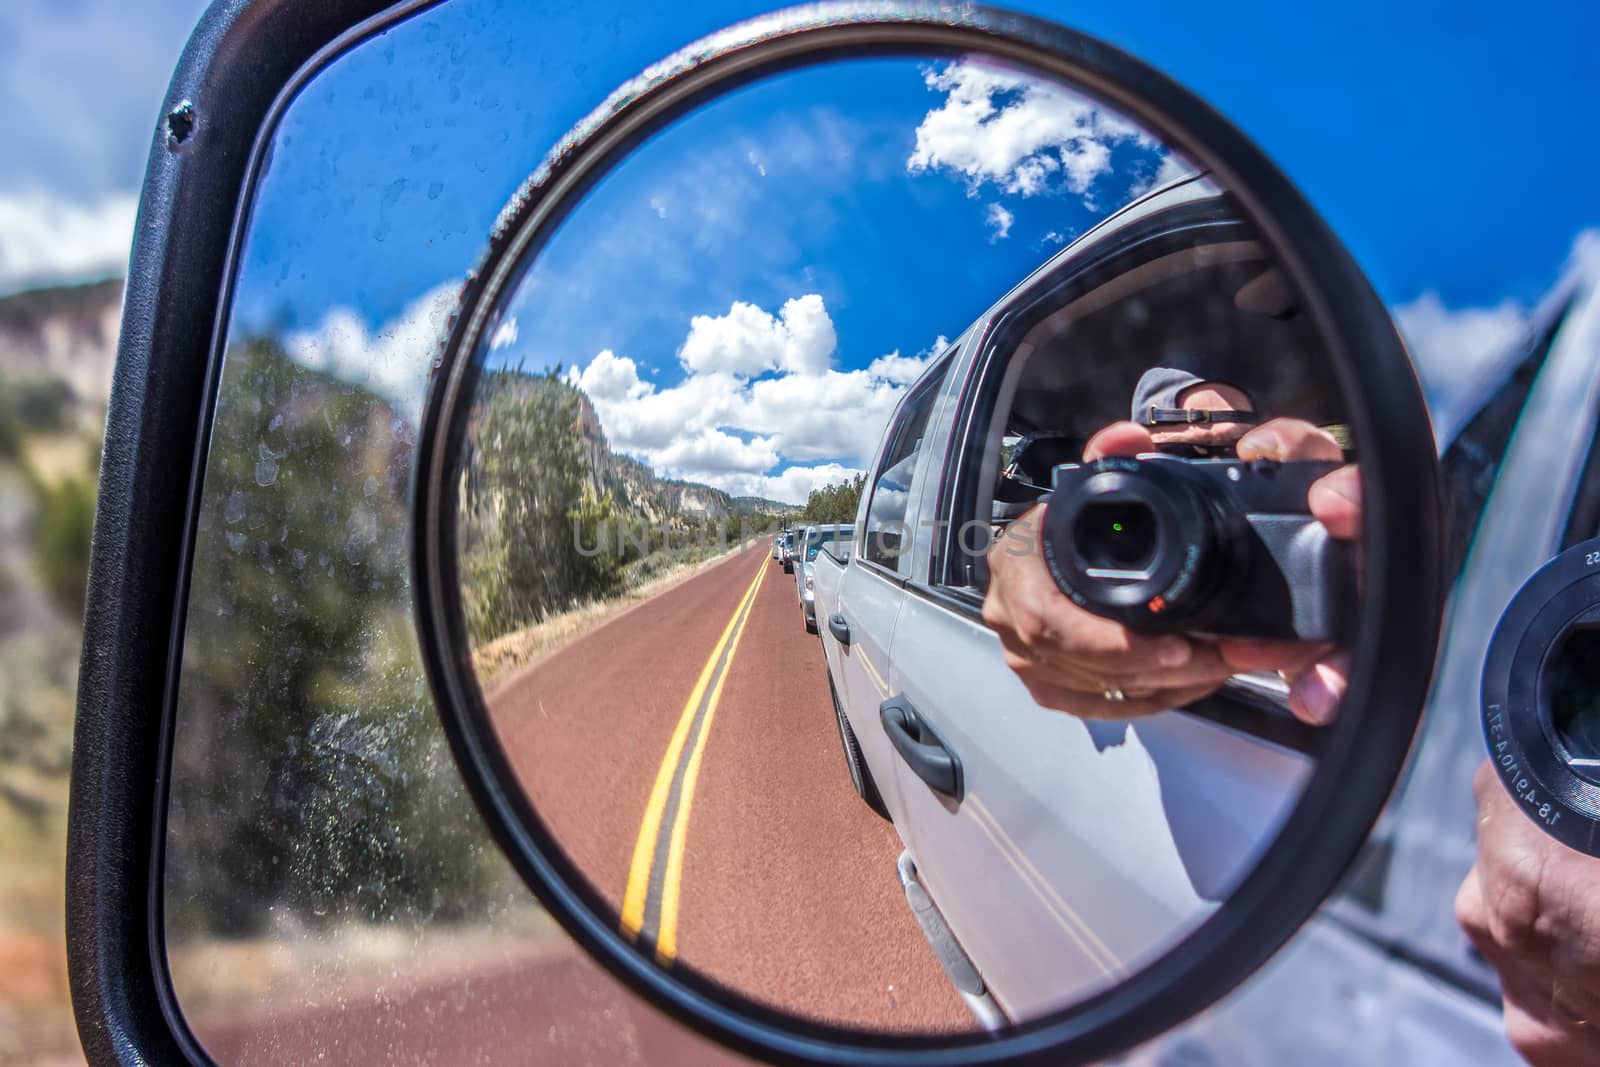  camera reflected in the rearview mirror of a car on a summer da by digidreamgrafix